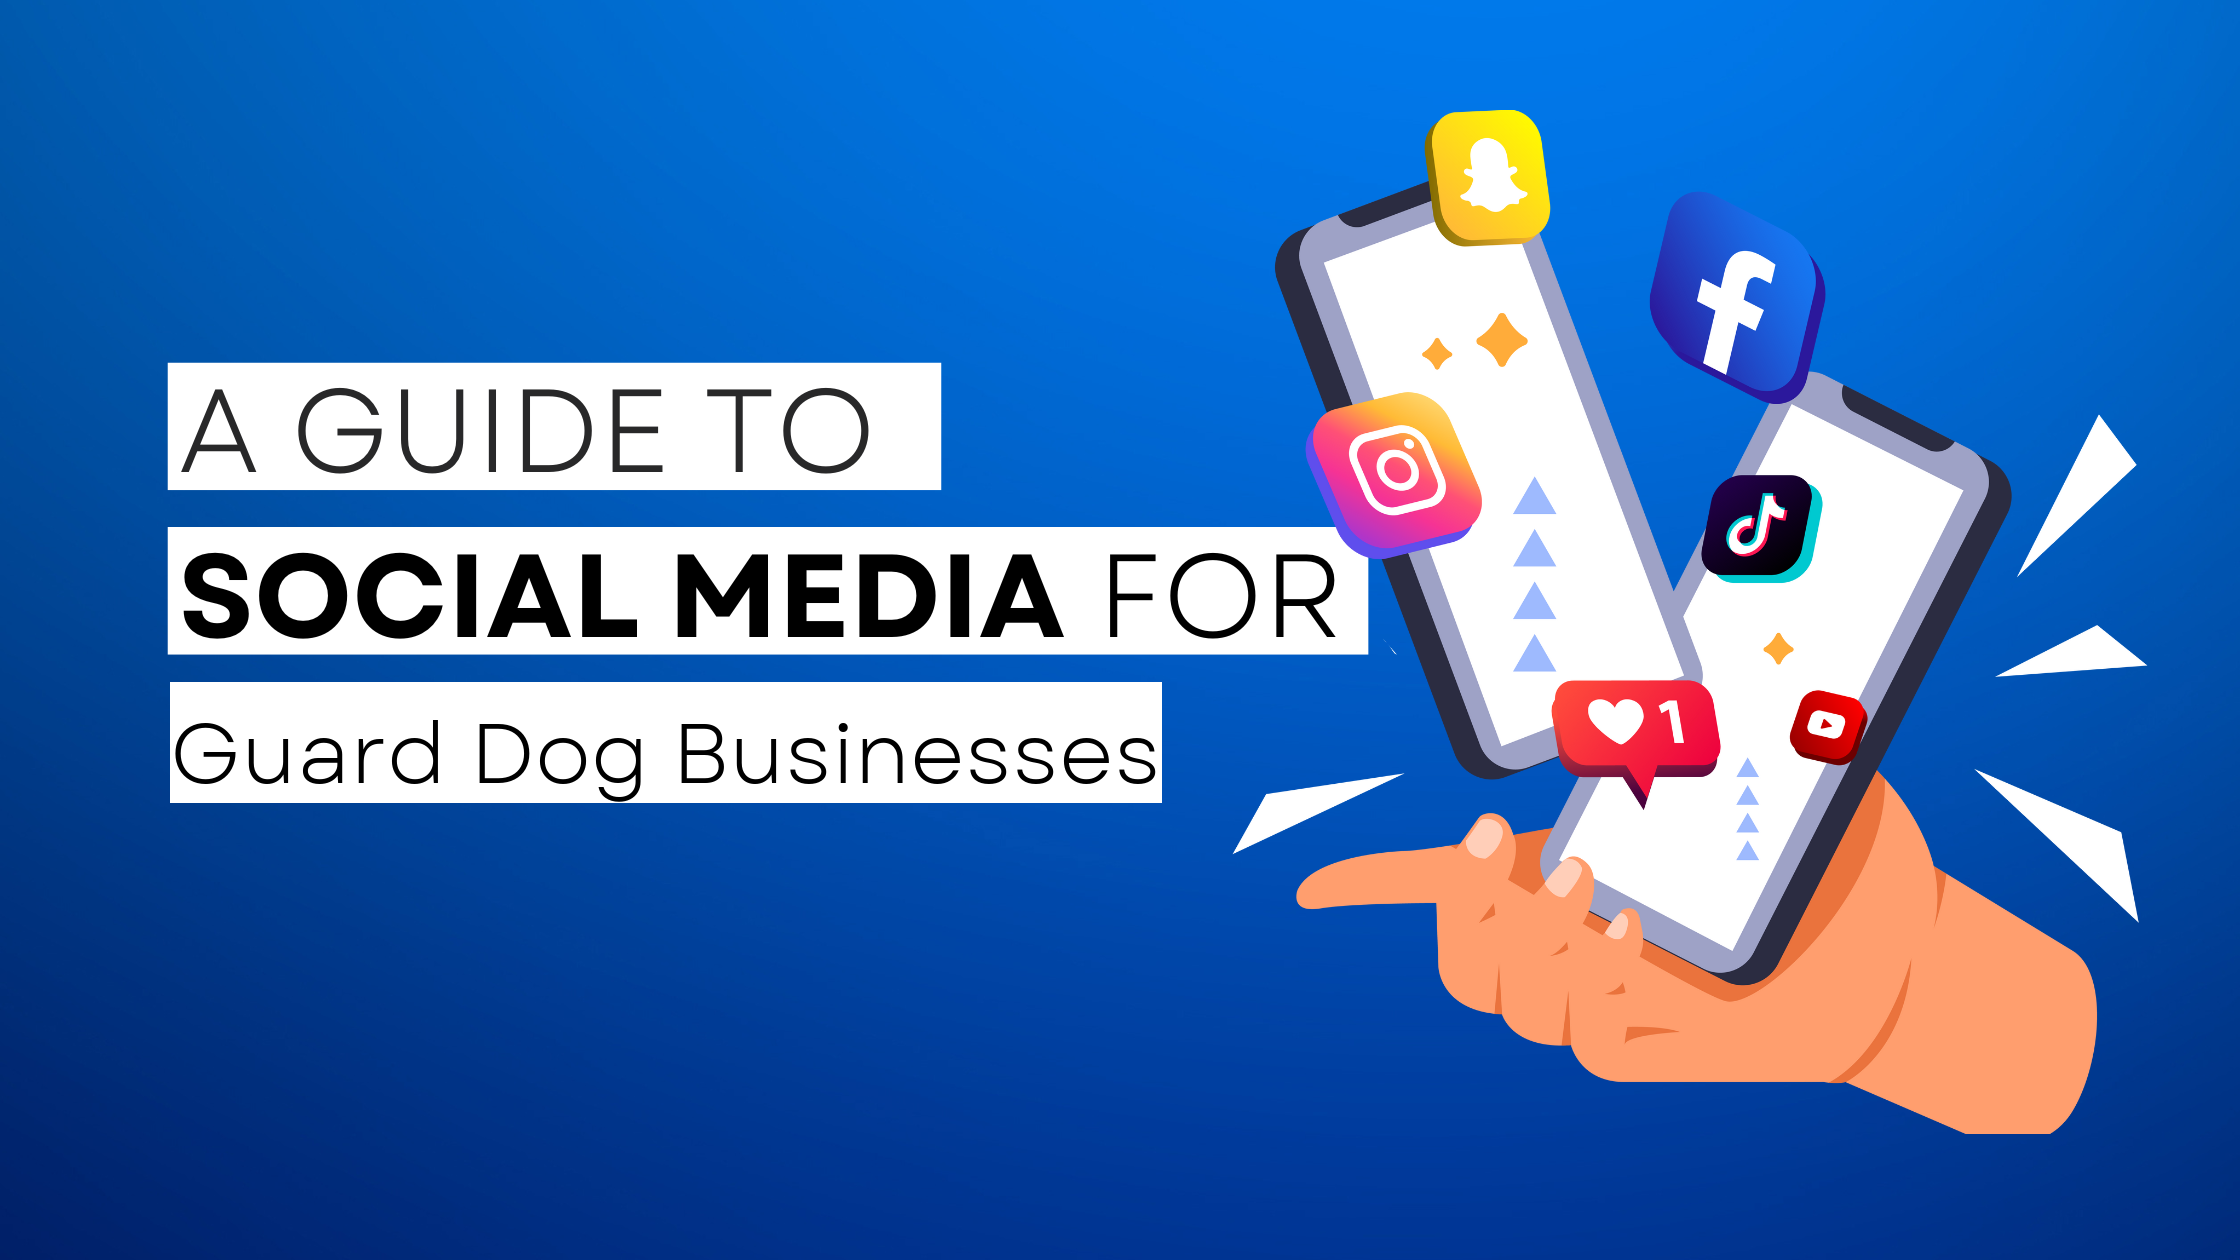 How to start Guard Dog  on social media